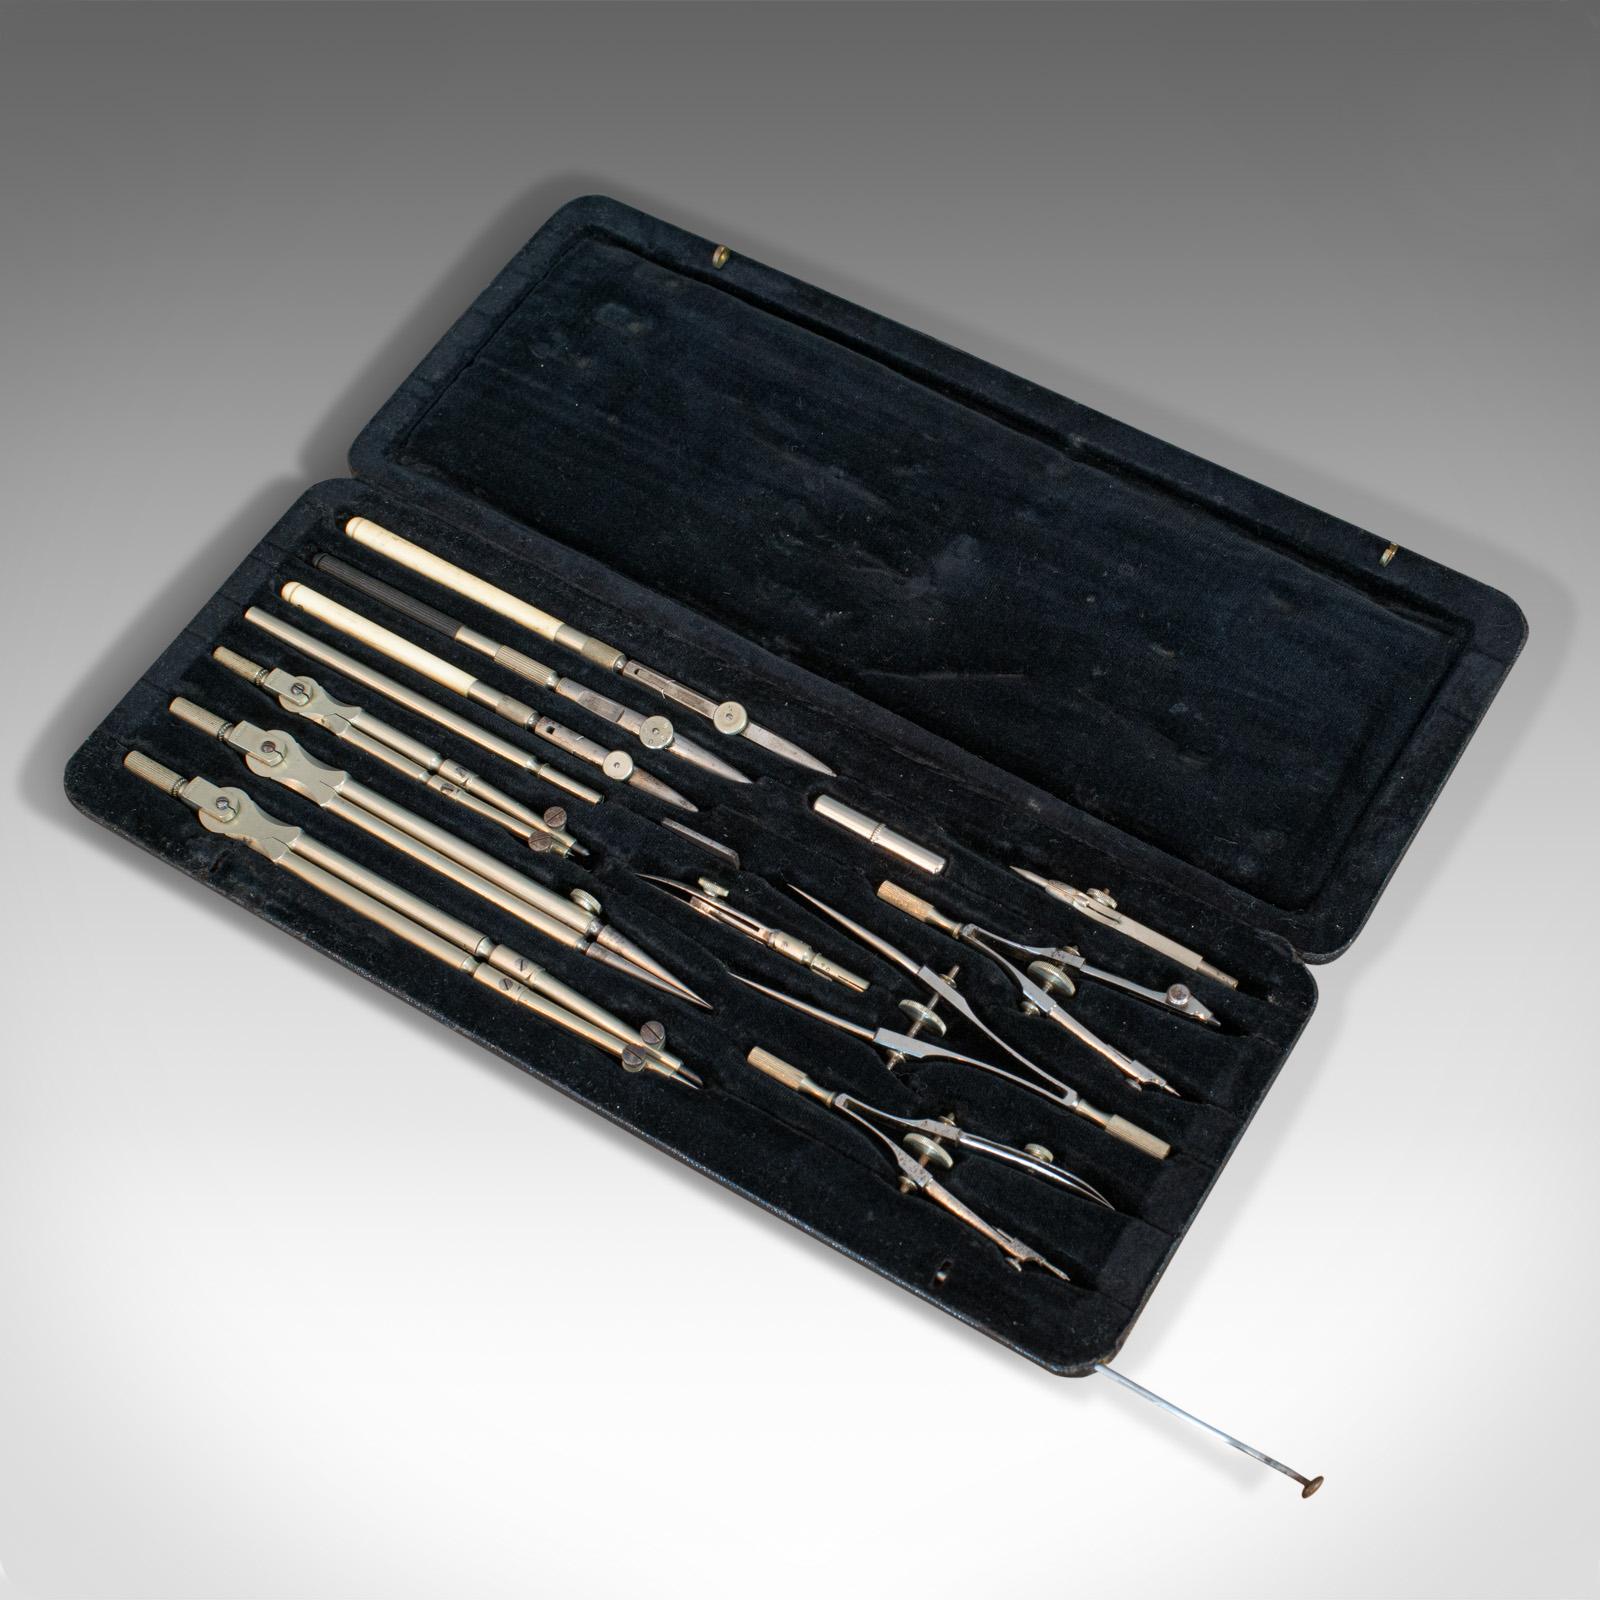 drawing set for technical drawing